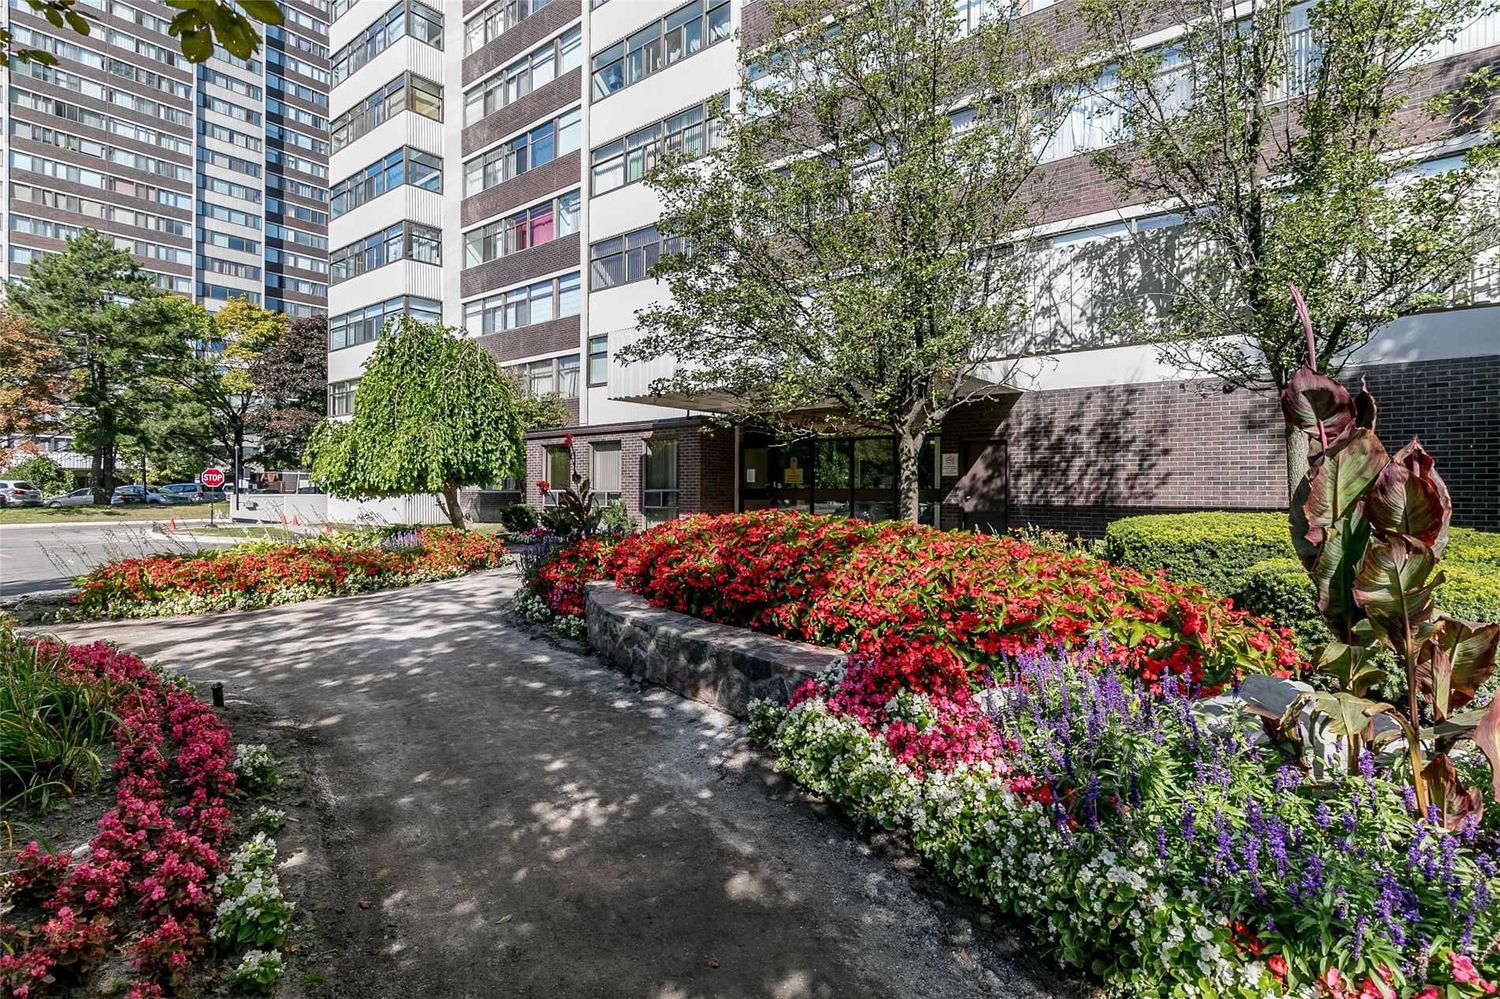 100 Antibes Drive. Antibes Court Condos is located in  North York, Toronto - image #2 of 2